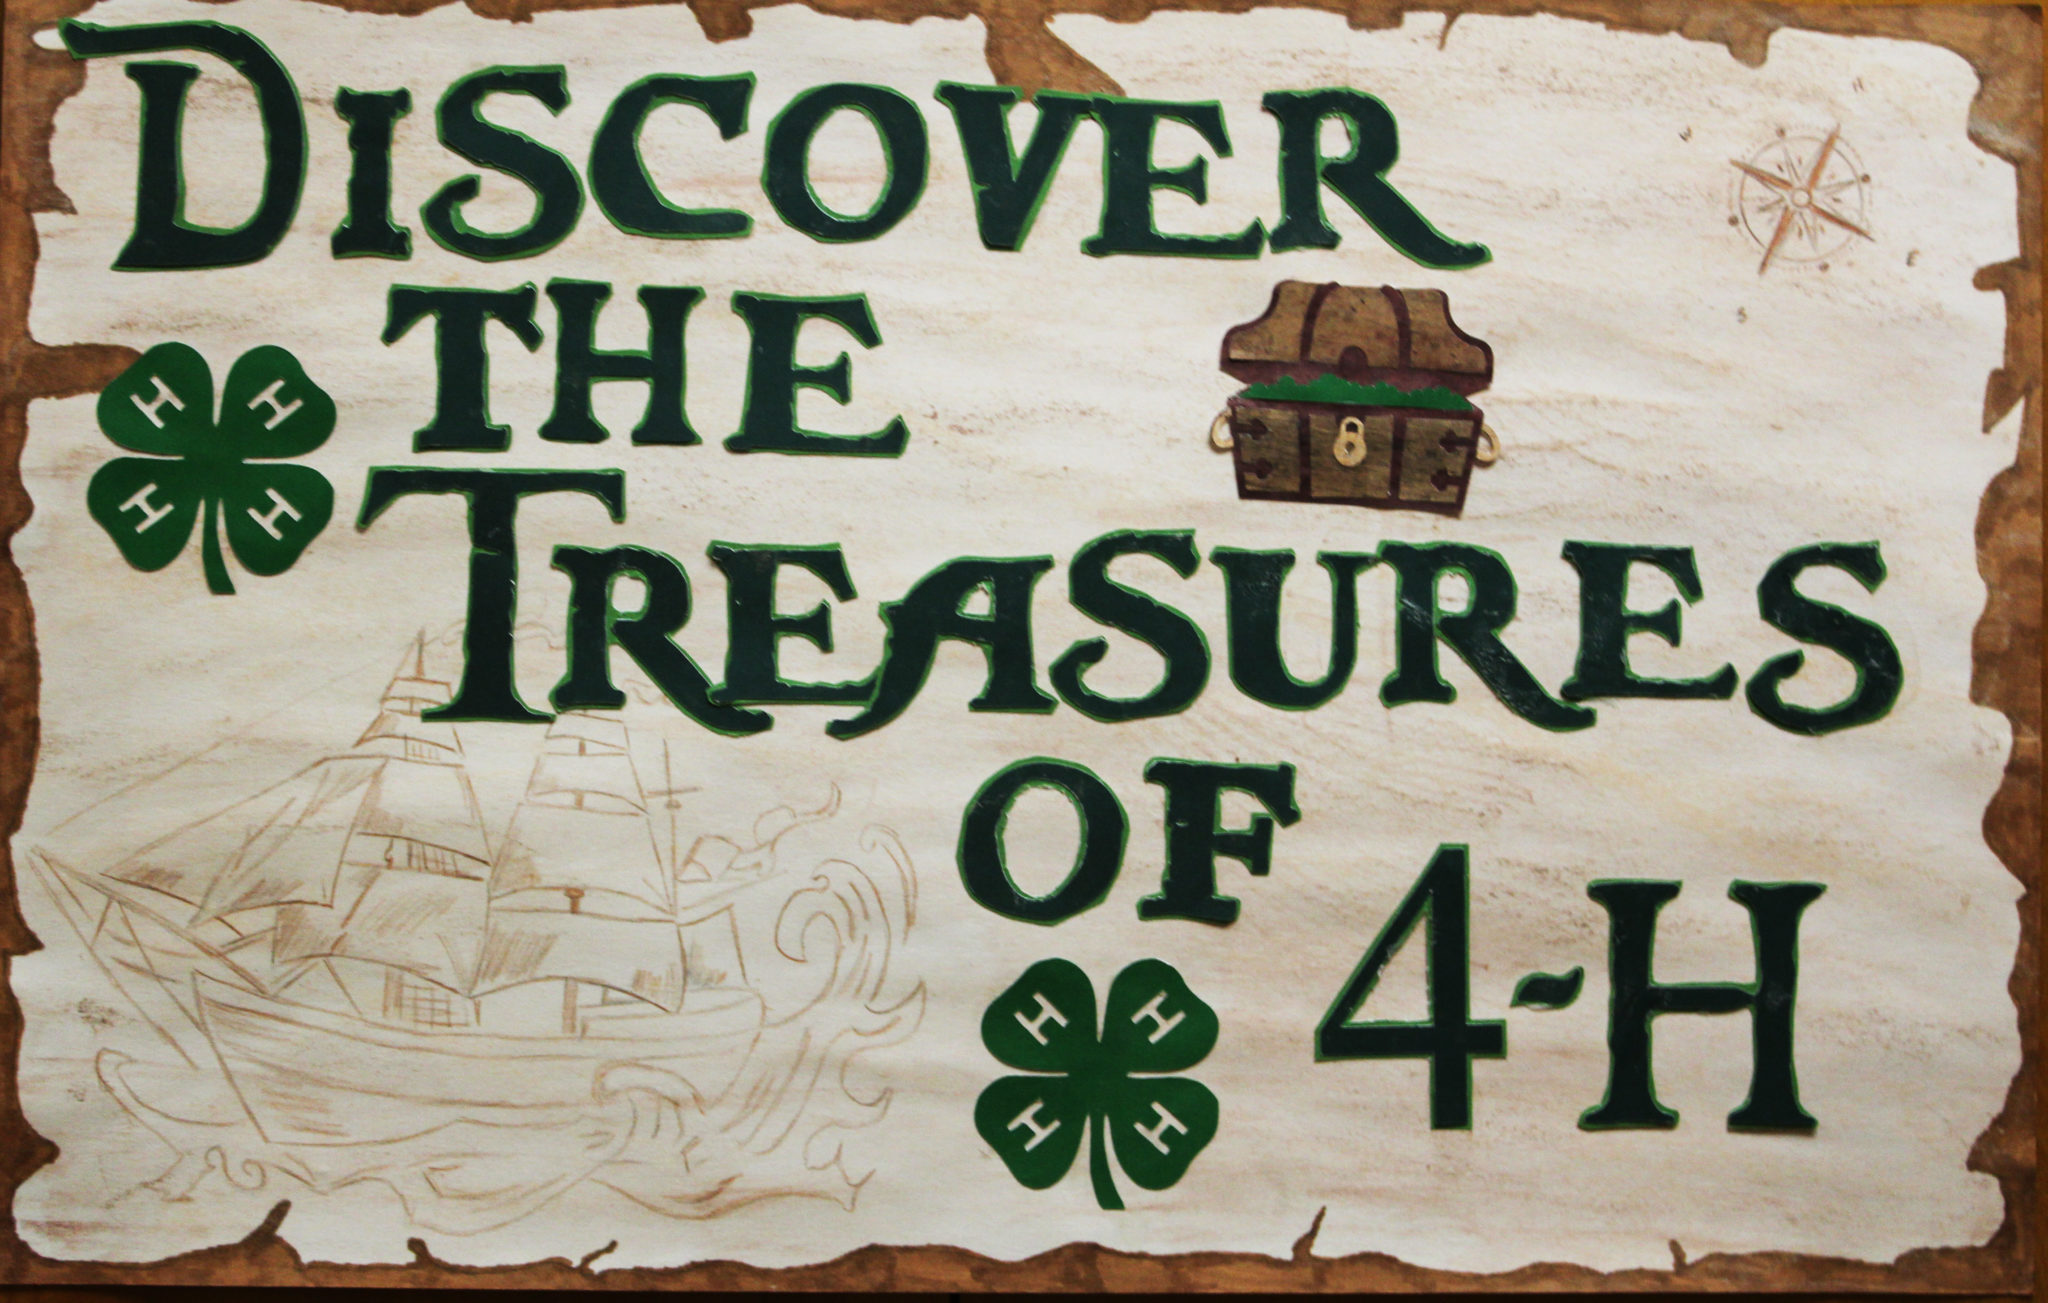 Discover the treasures of 4-H - Donny Sloan Poster Winner